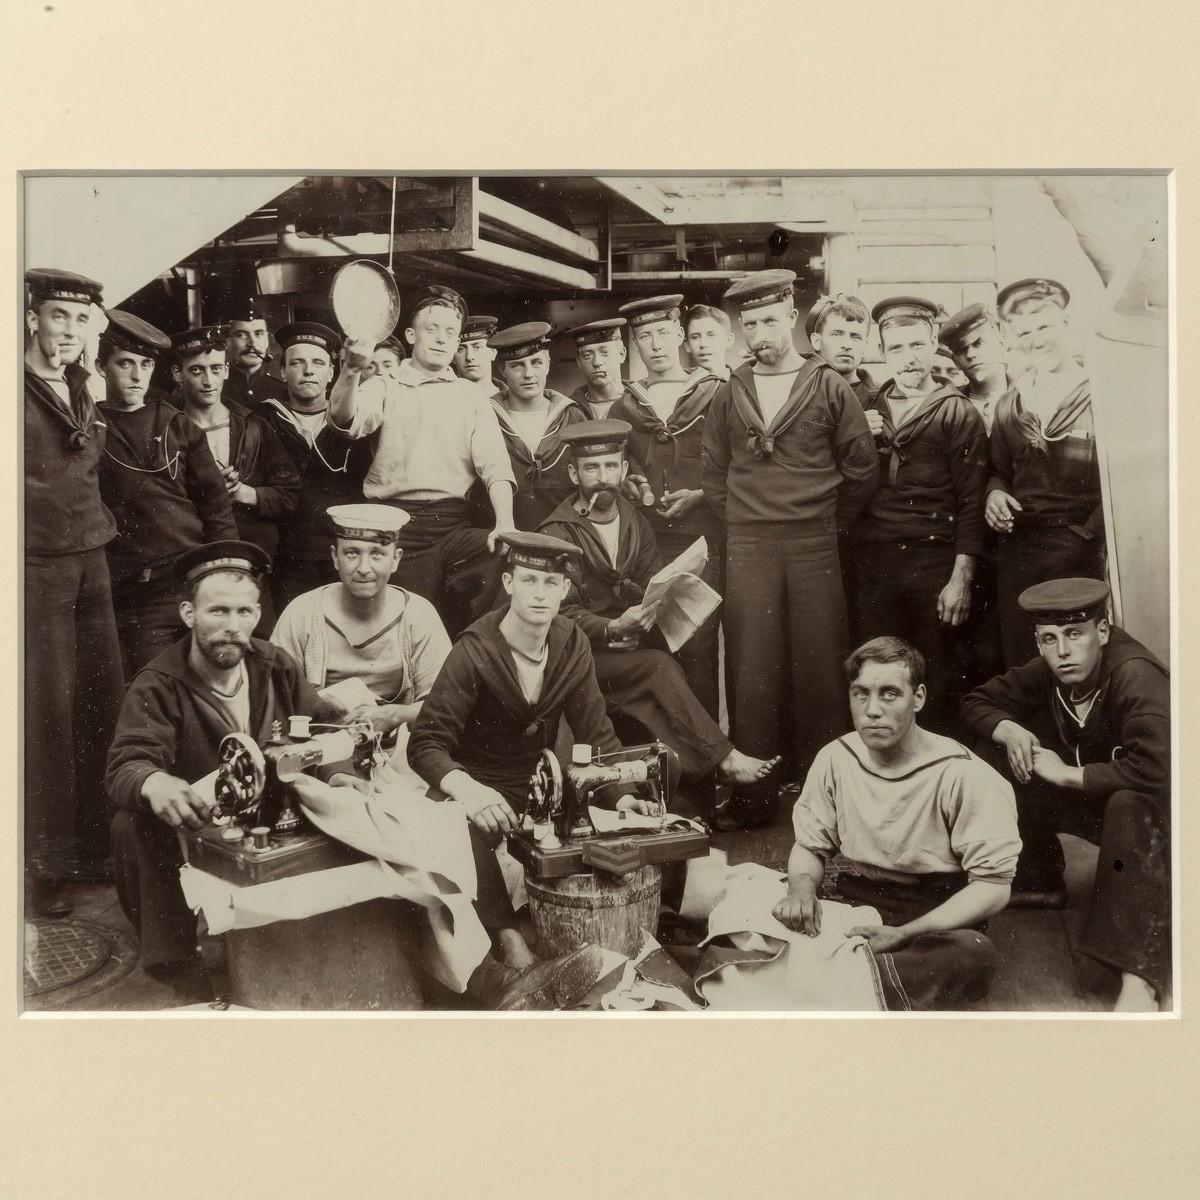 A framed Gelatin photograph of the crew of HMS Dido on deck,
circa 1880.